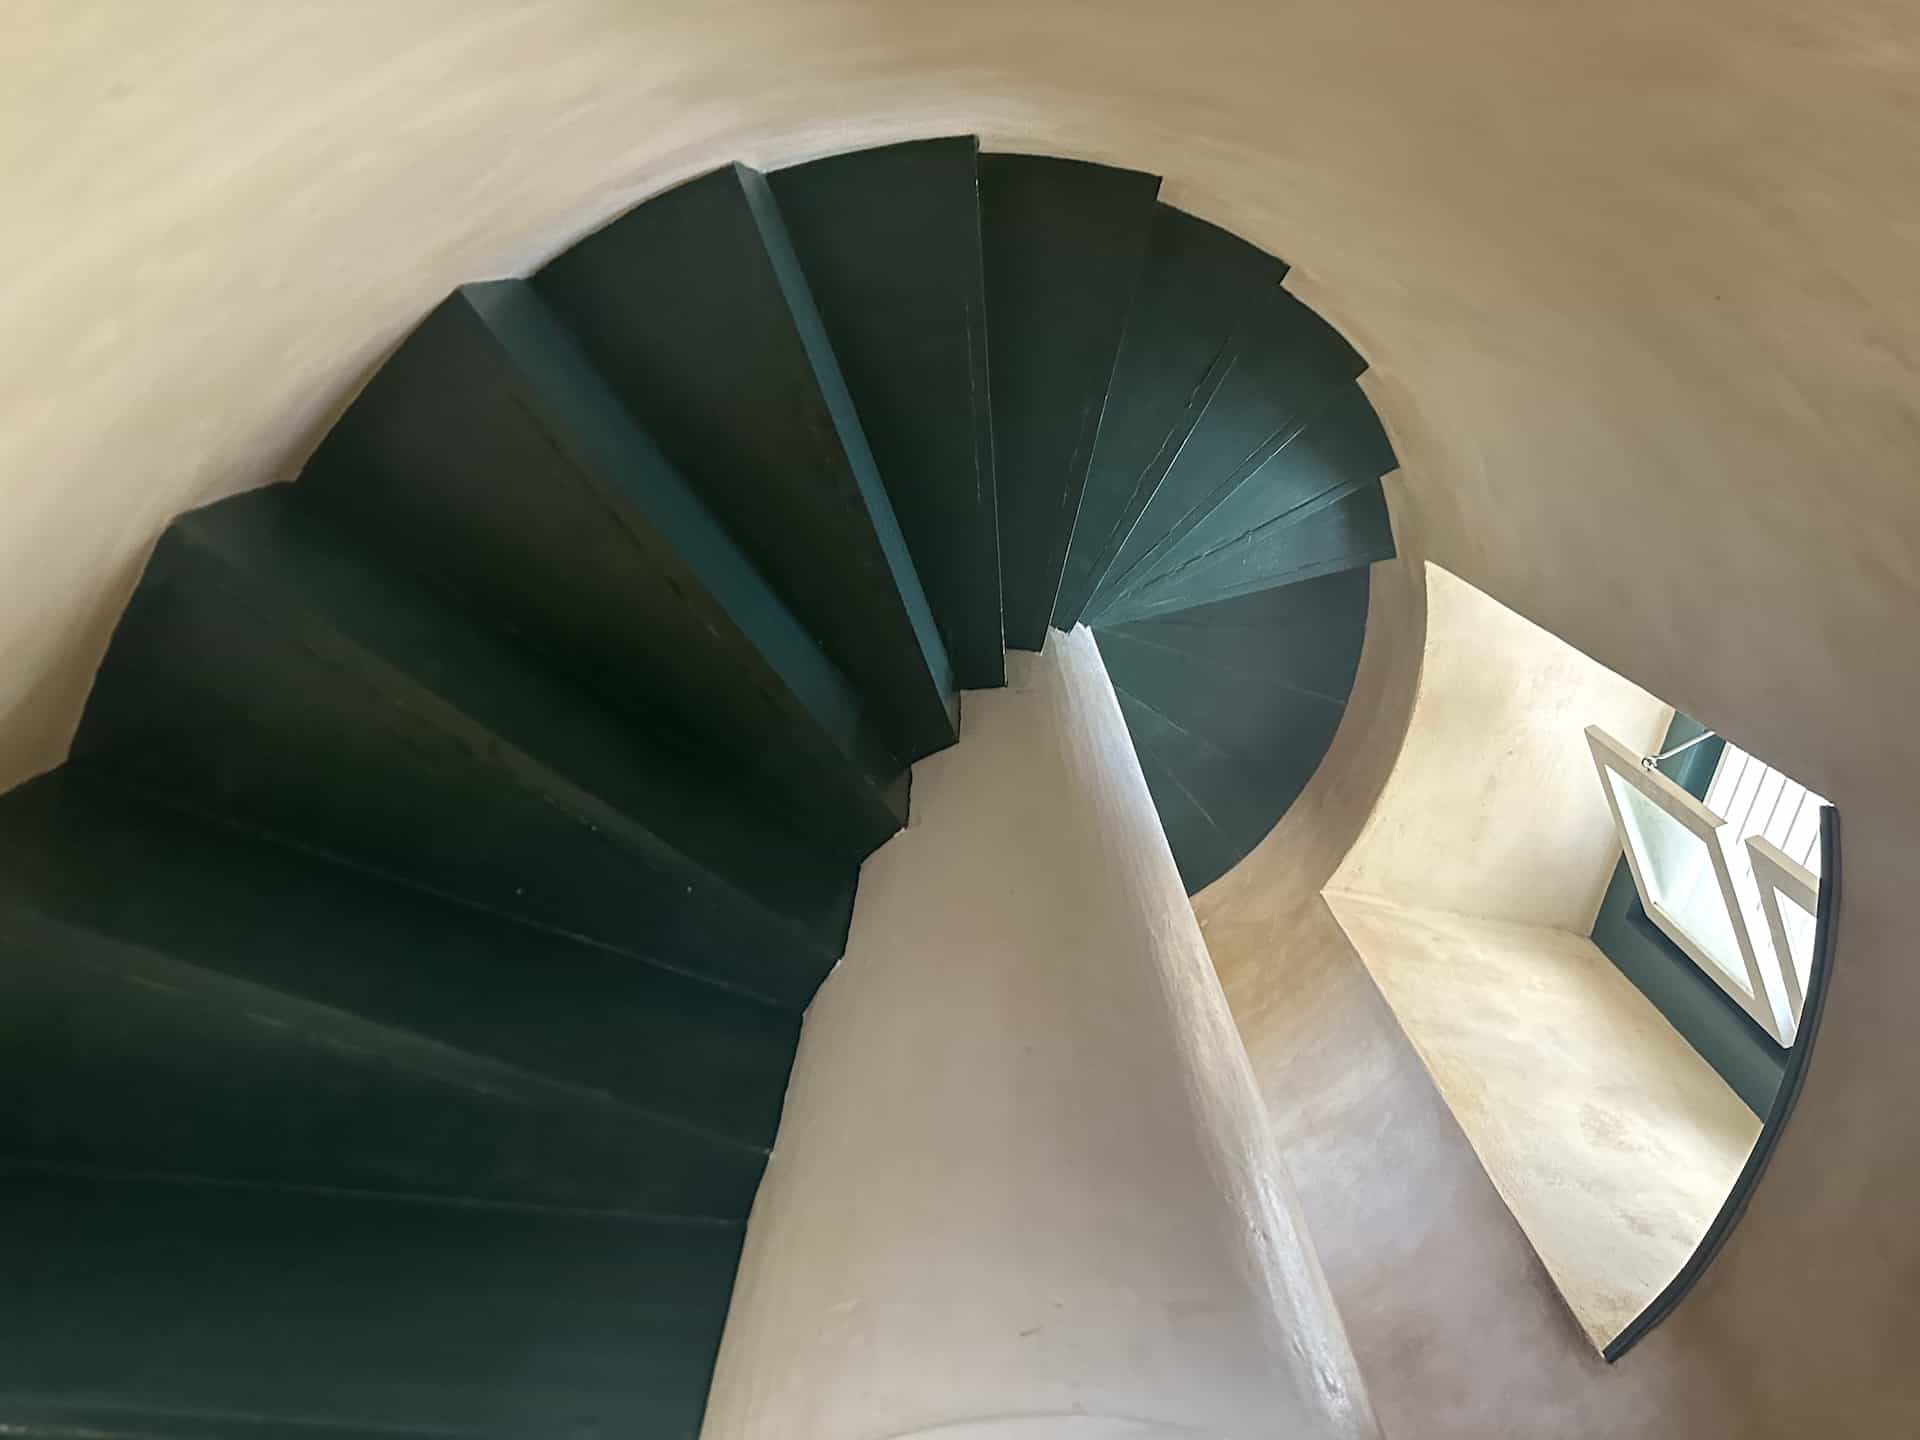 Stairs of the California Lighthouse